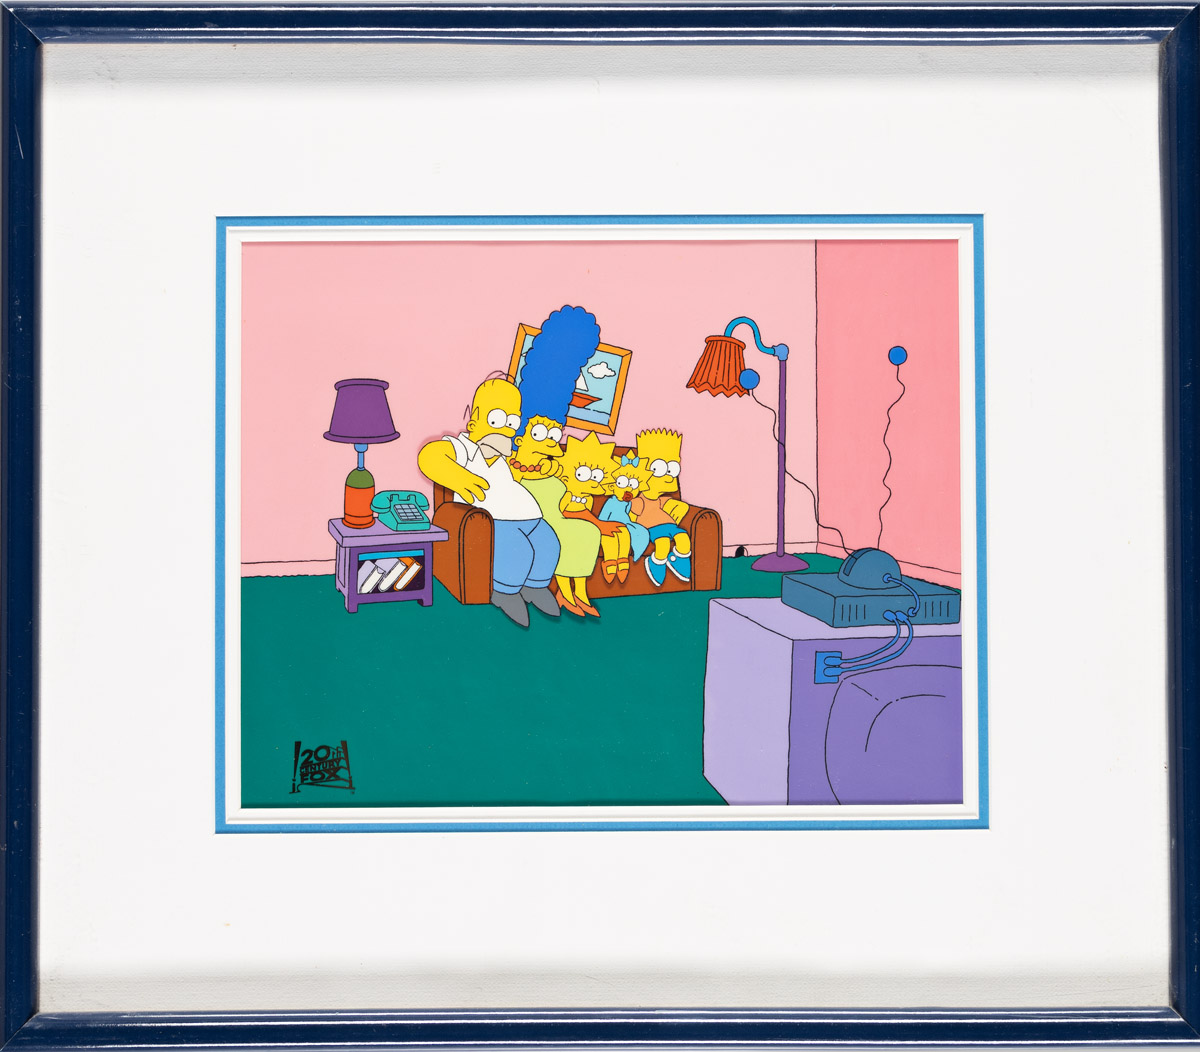 (ANIMATION) THE SIMPSONS / MATT GROENING (1954-) The Simpsons. Couch Gag cel setup.